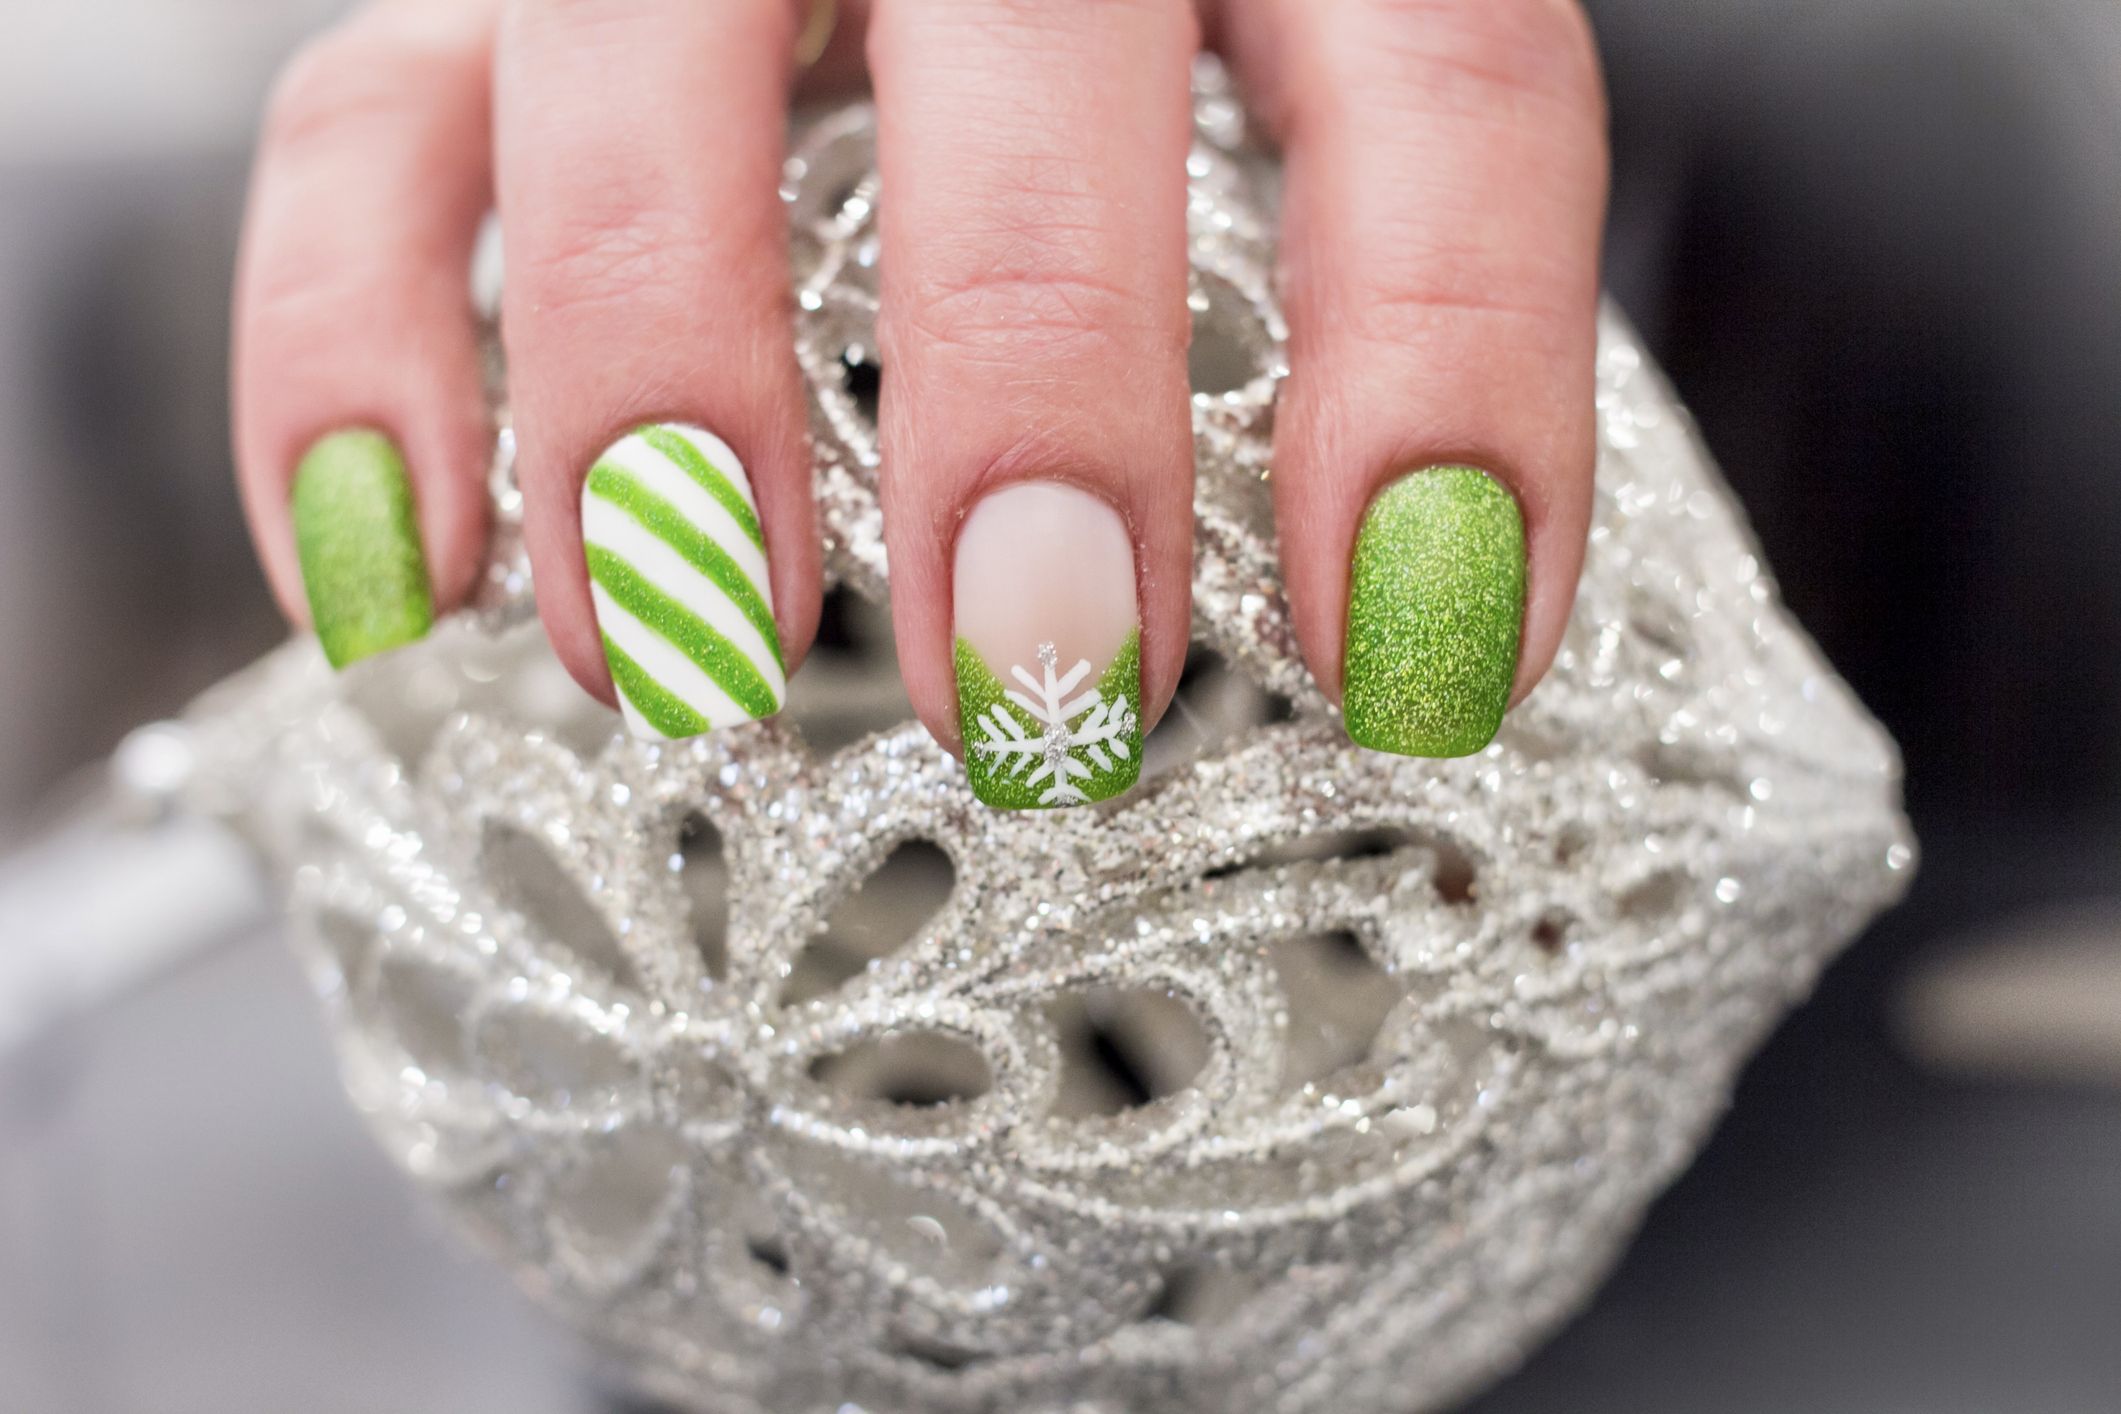 1. "Cute Christmas Nail Designs on Tumblr" - wide 4